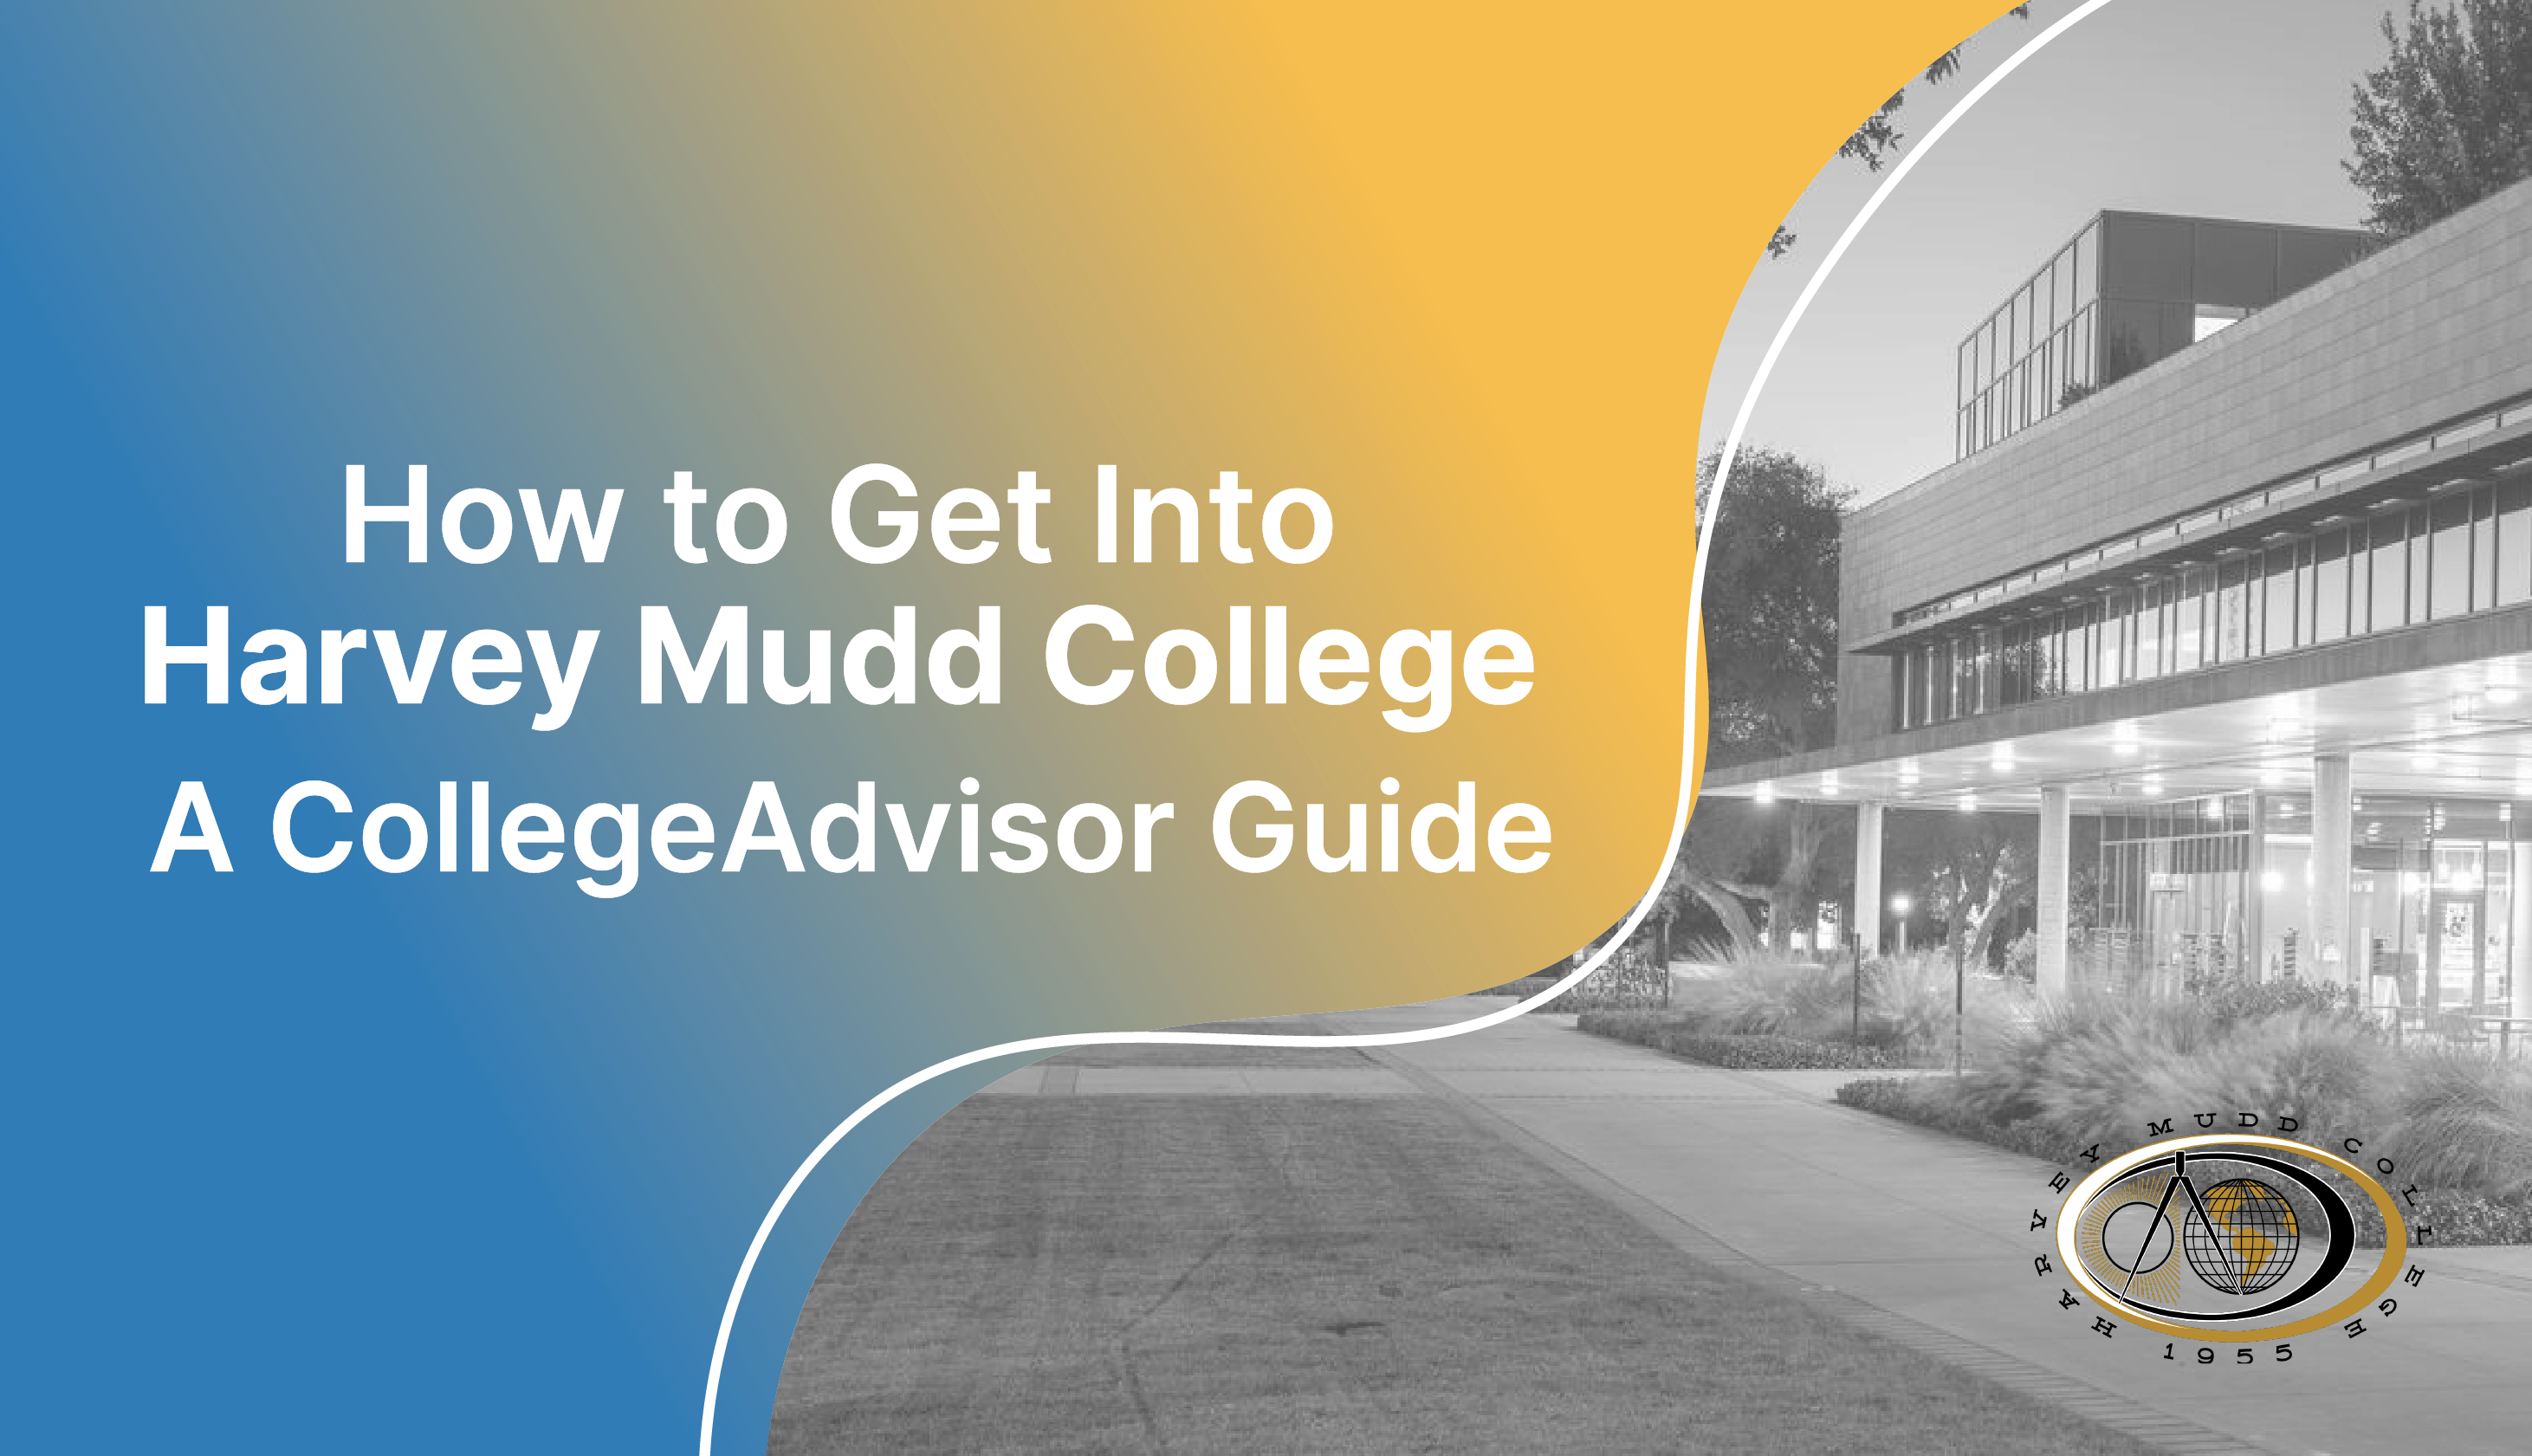 How to Get Into Harvey Mudd Guide"